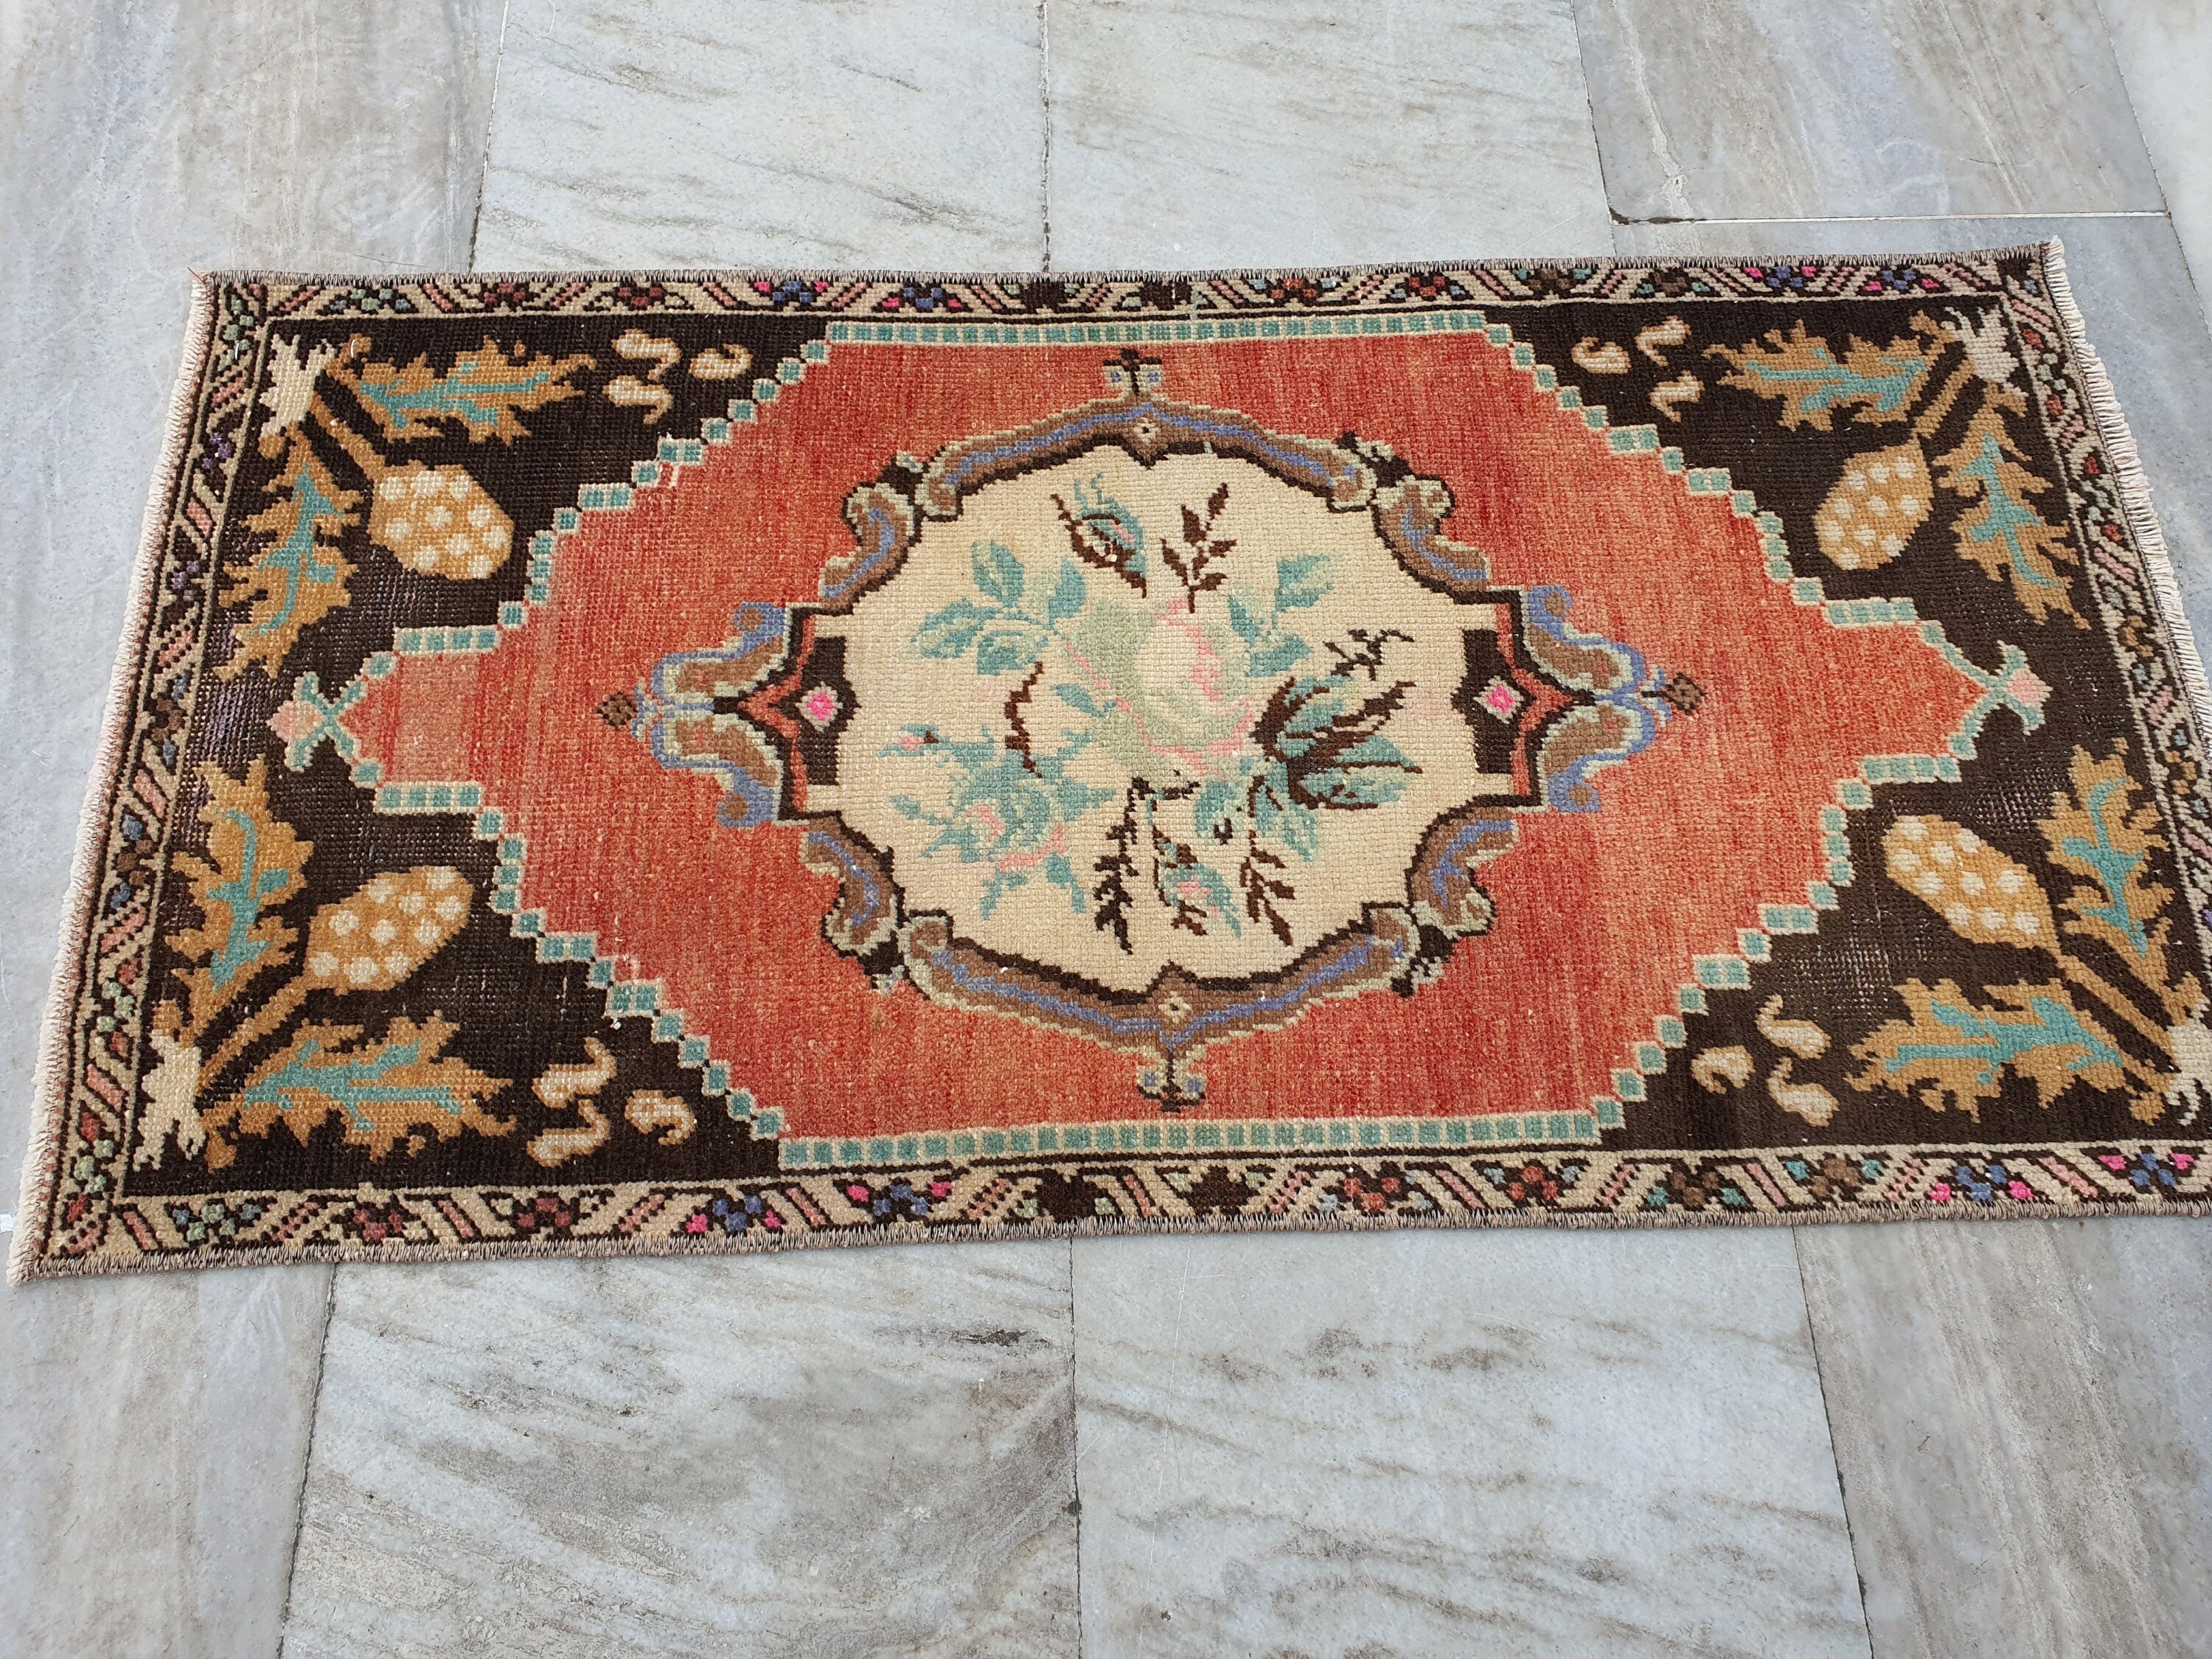 Vintage Turkish Small Rug, 3 ft 1 in x 1 ft 6 in, 	Red, Brown and Beige Faded Distressed Antique Style Mat